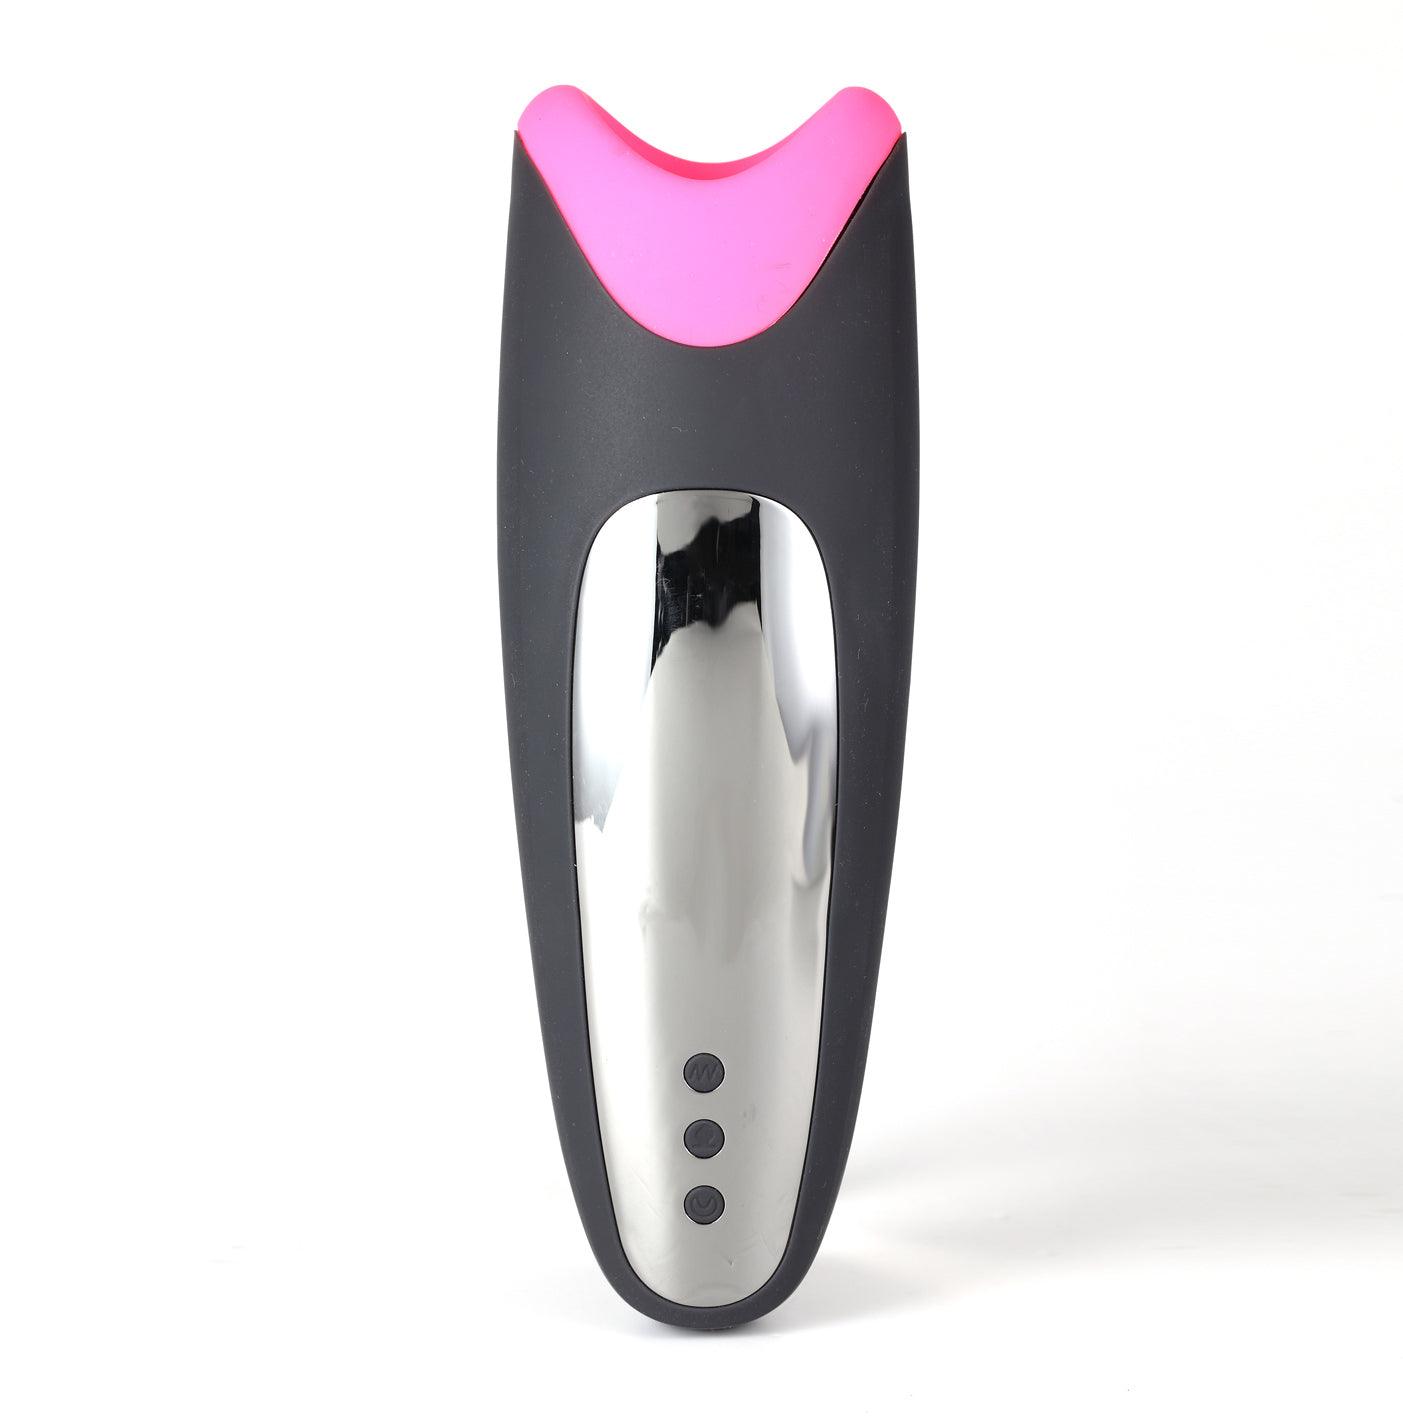 Piper USB Rechargeable Multi Function Masturbator With Suction - Black/pink - My Sex Toy Hub